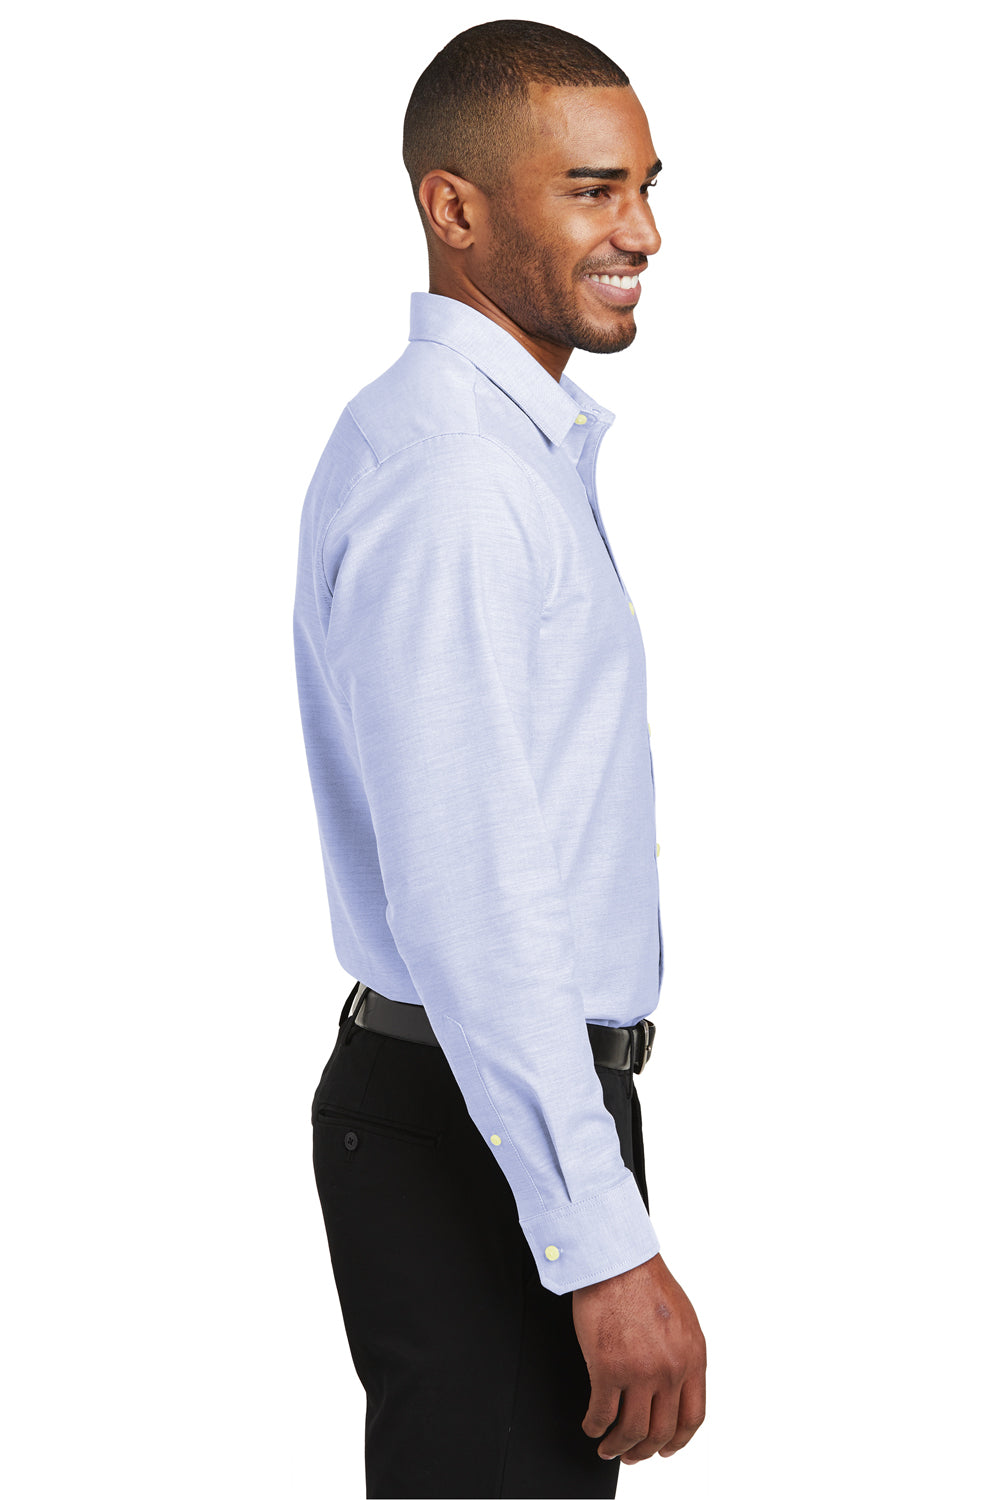 Port Authority S661 Mens SuperPro Oxford Wrinkle Resistant Long Sleeve Button Down Shirt Oxford Blue Side